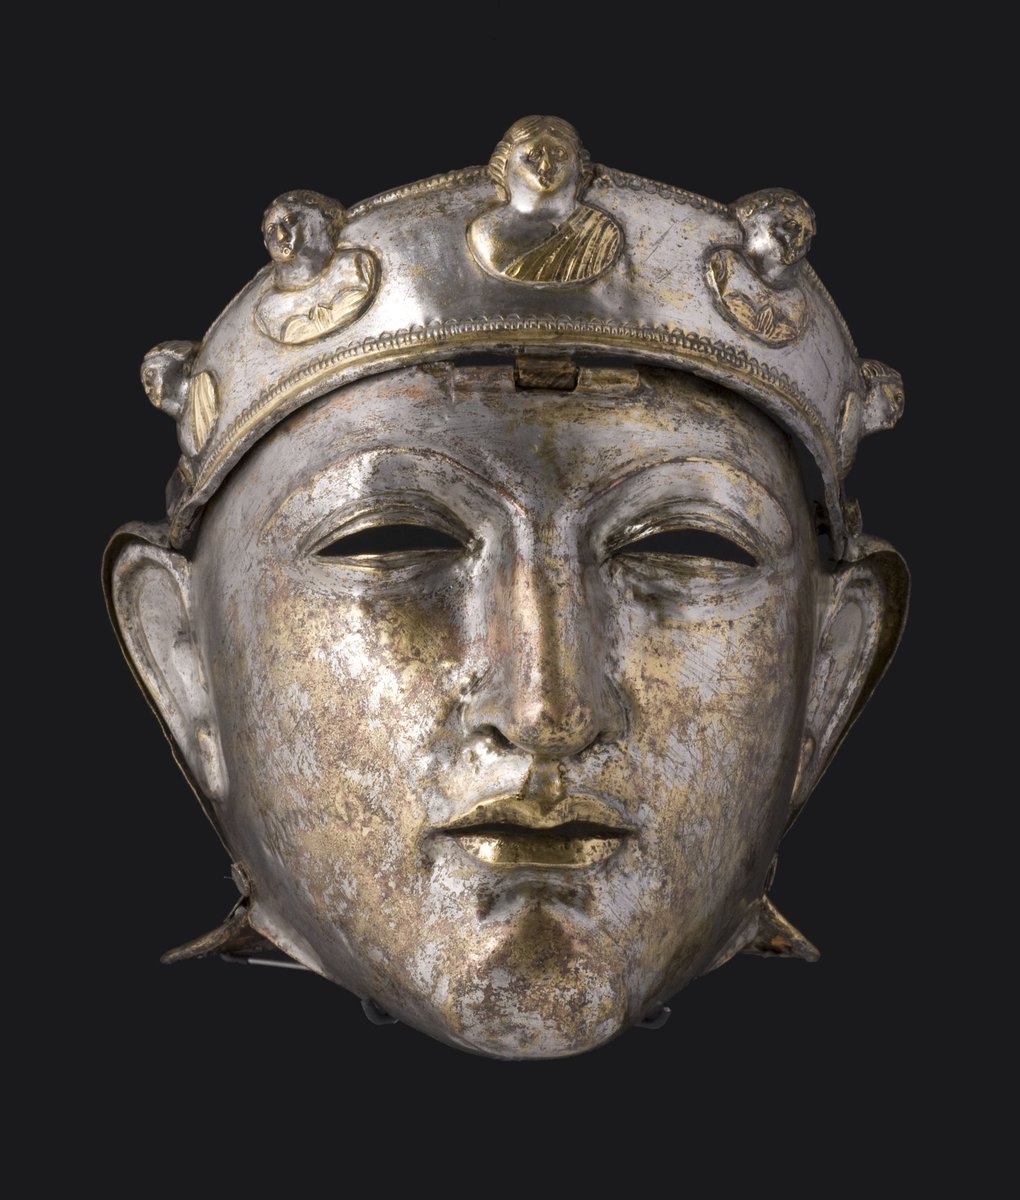 #ClassicsAdventCalendar - Day 4: The Nijmegen Helmet Visored cavalry display helmet: ca. Early 2nd Century AD. The diadem is embellished with miniature busts, with the name 'Marcianus' scratched into the right cheek. #Roman Image: Valkhof Museum. Link - valkhofmuseum.nl/en/verdieping/…